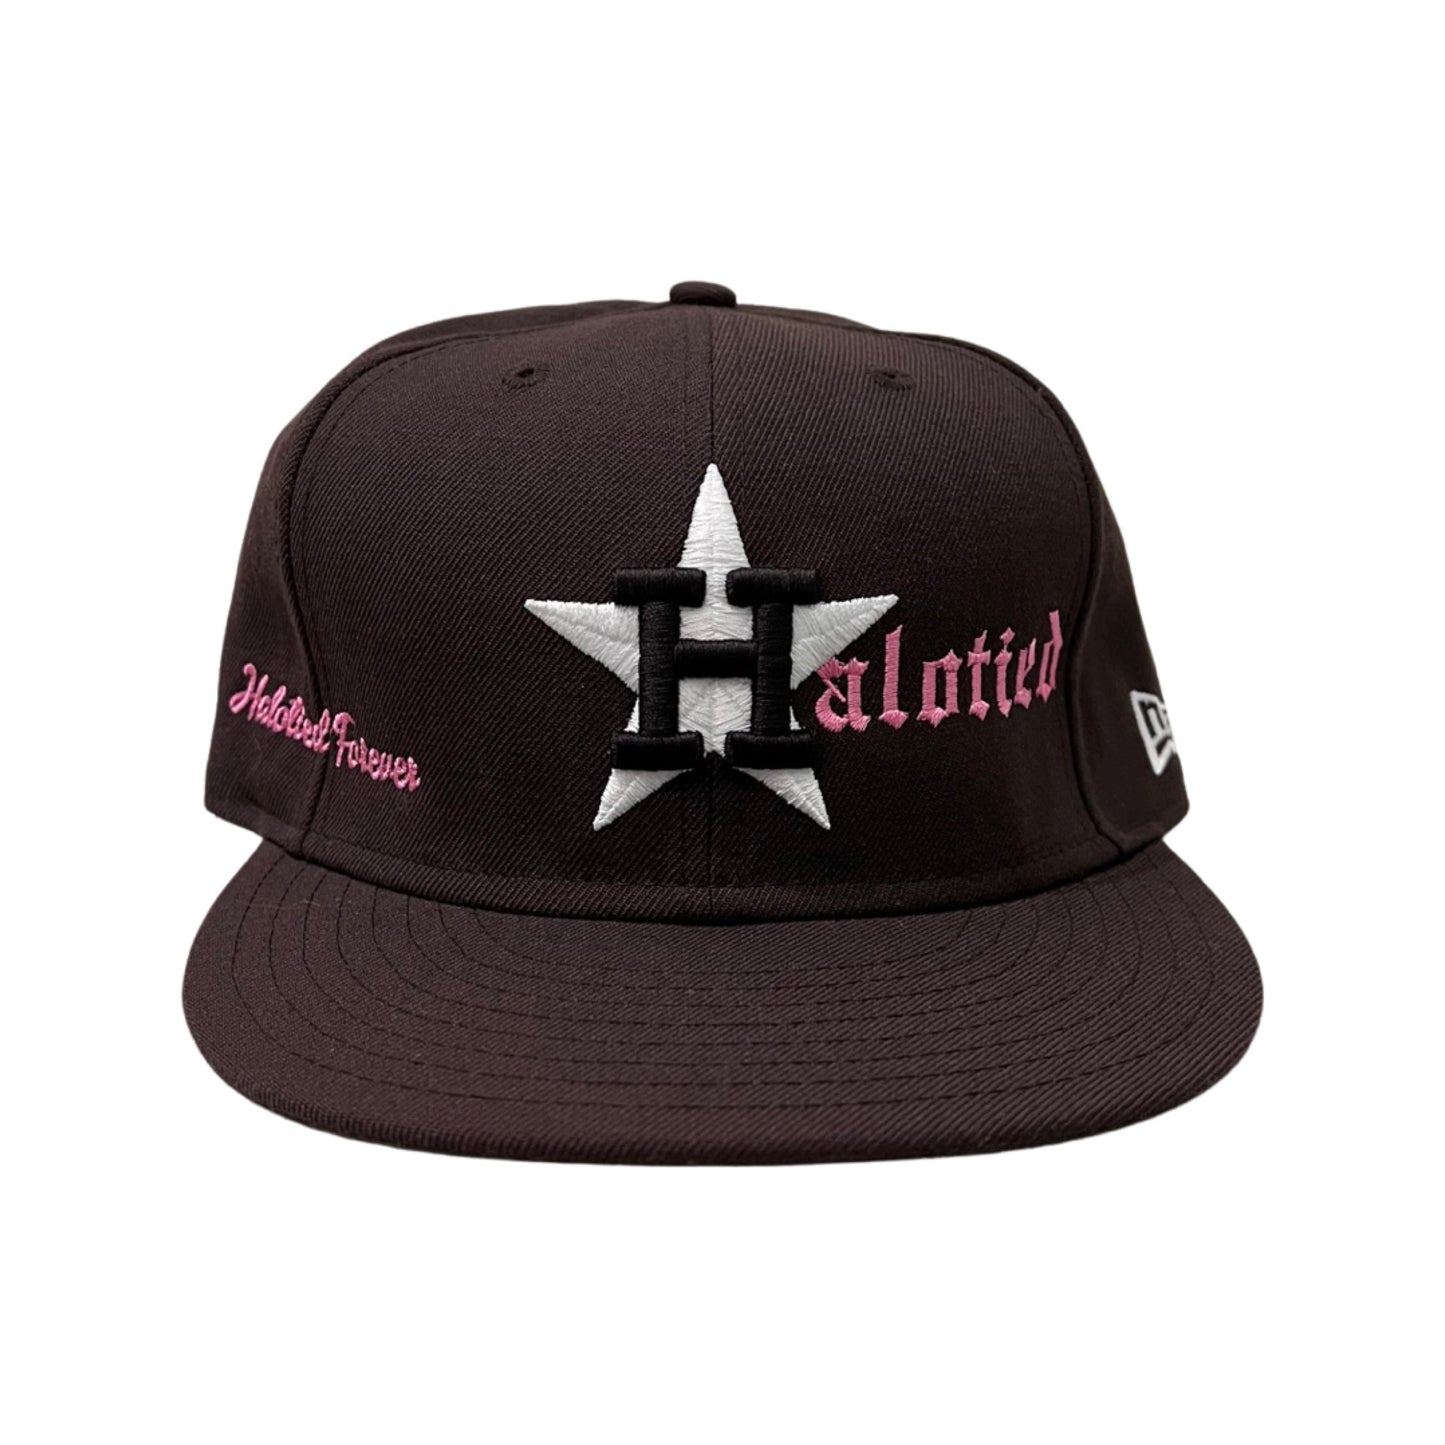 11/12 HALO FITTED HAT SIZE 7 1/2